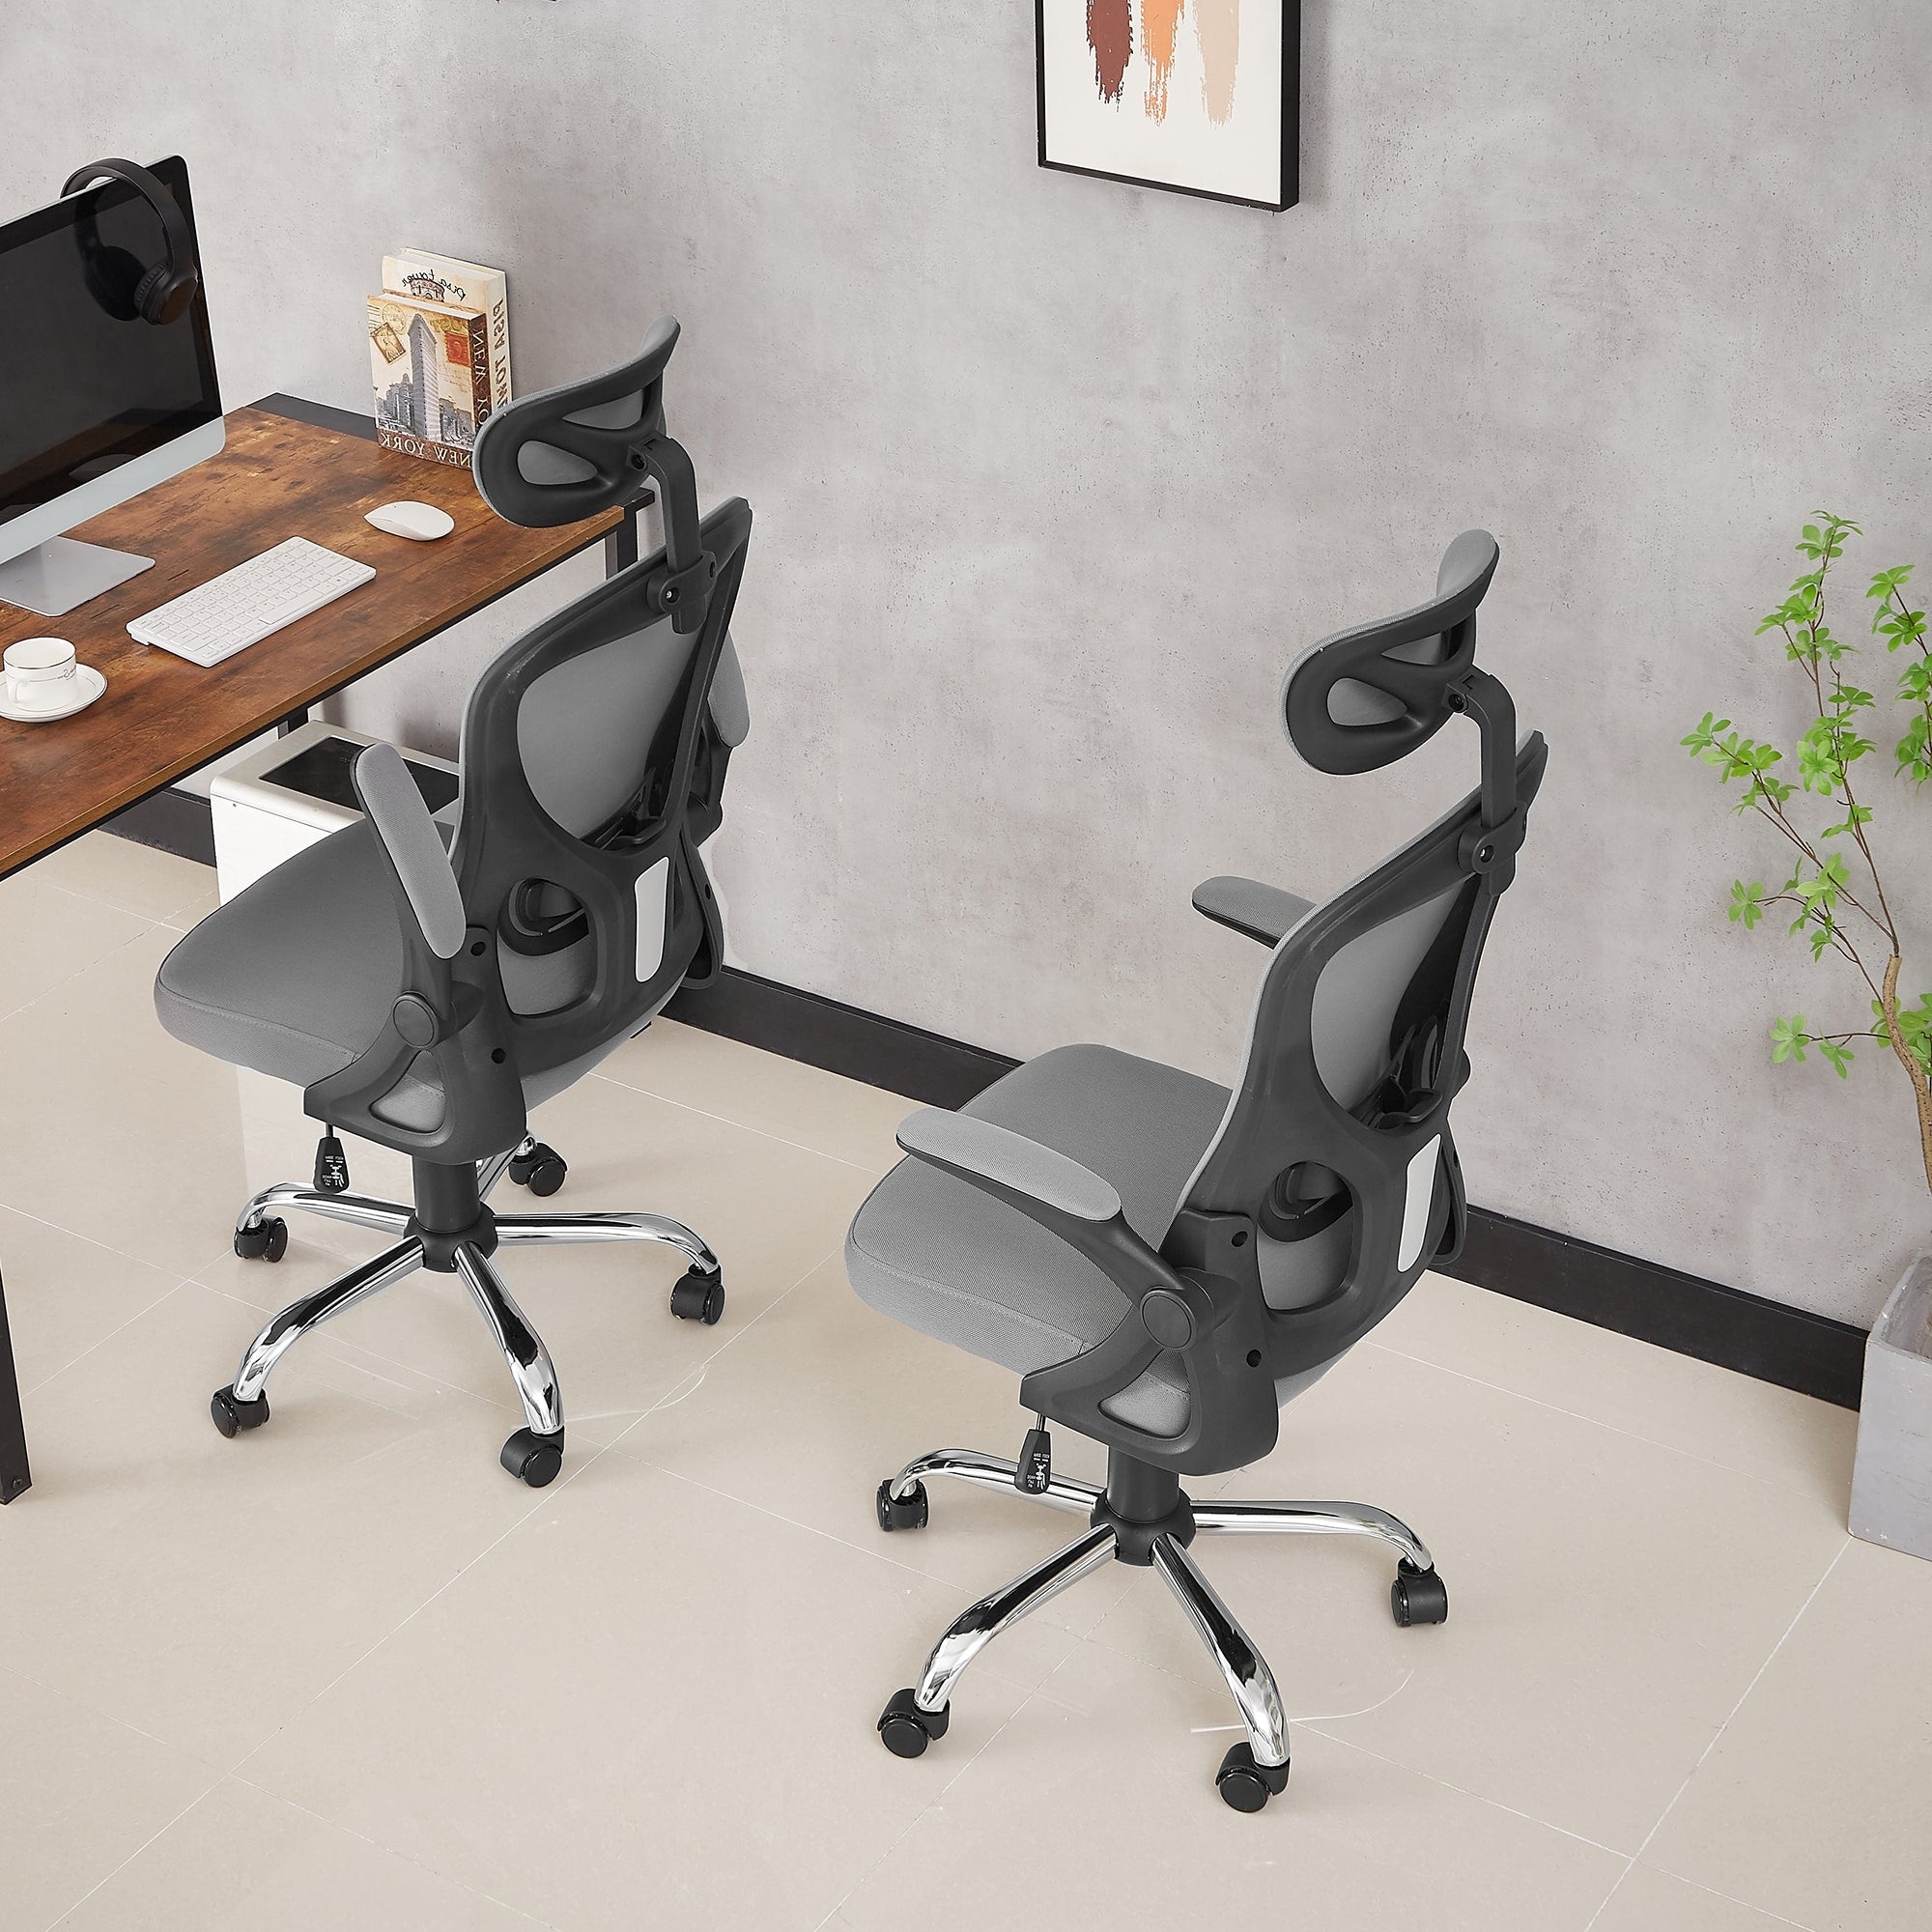 https://ak1.ostkcdn.com/images/products/is/images/direct/f98db9ff6b24c049880ed2a8345d4bdd49101d1e/VECELO-High-Back-Ergonomic-Office-Chair-with-Adjustable-Headrest-Armrest-Mesh-Lumbar-Support.jpg